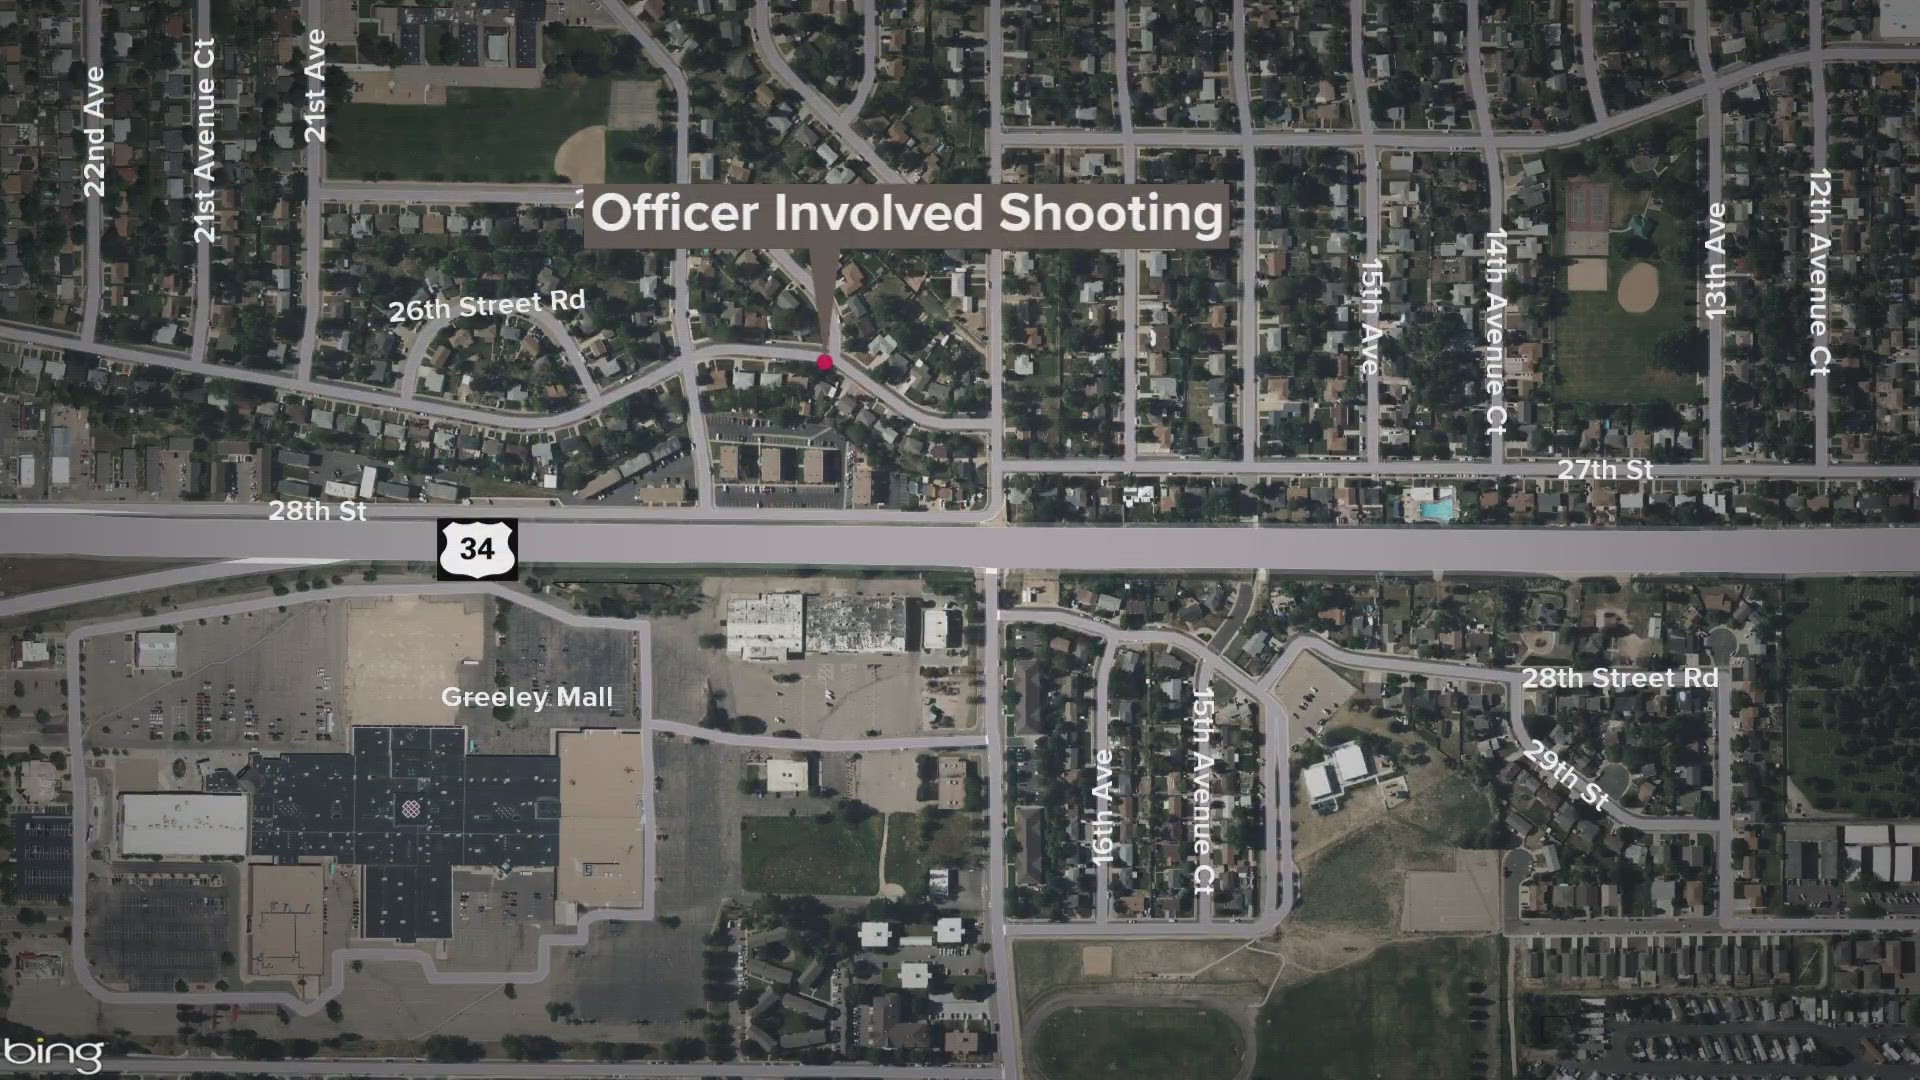 Officers returned fire when they were shot at by a 24-year-old man, the Critical Incident Response Team said.